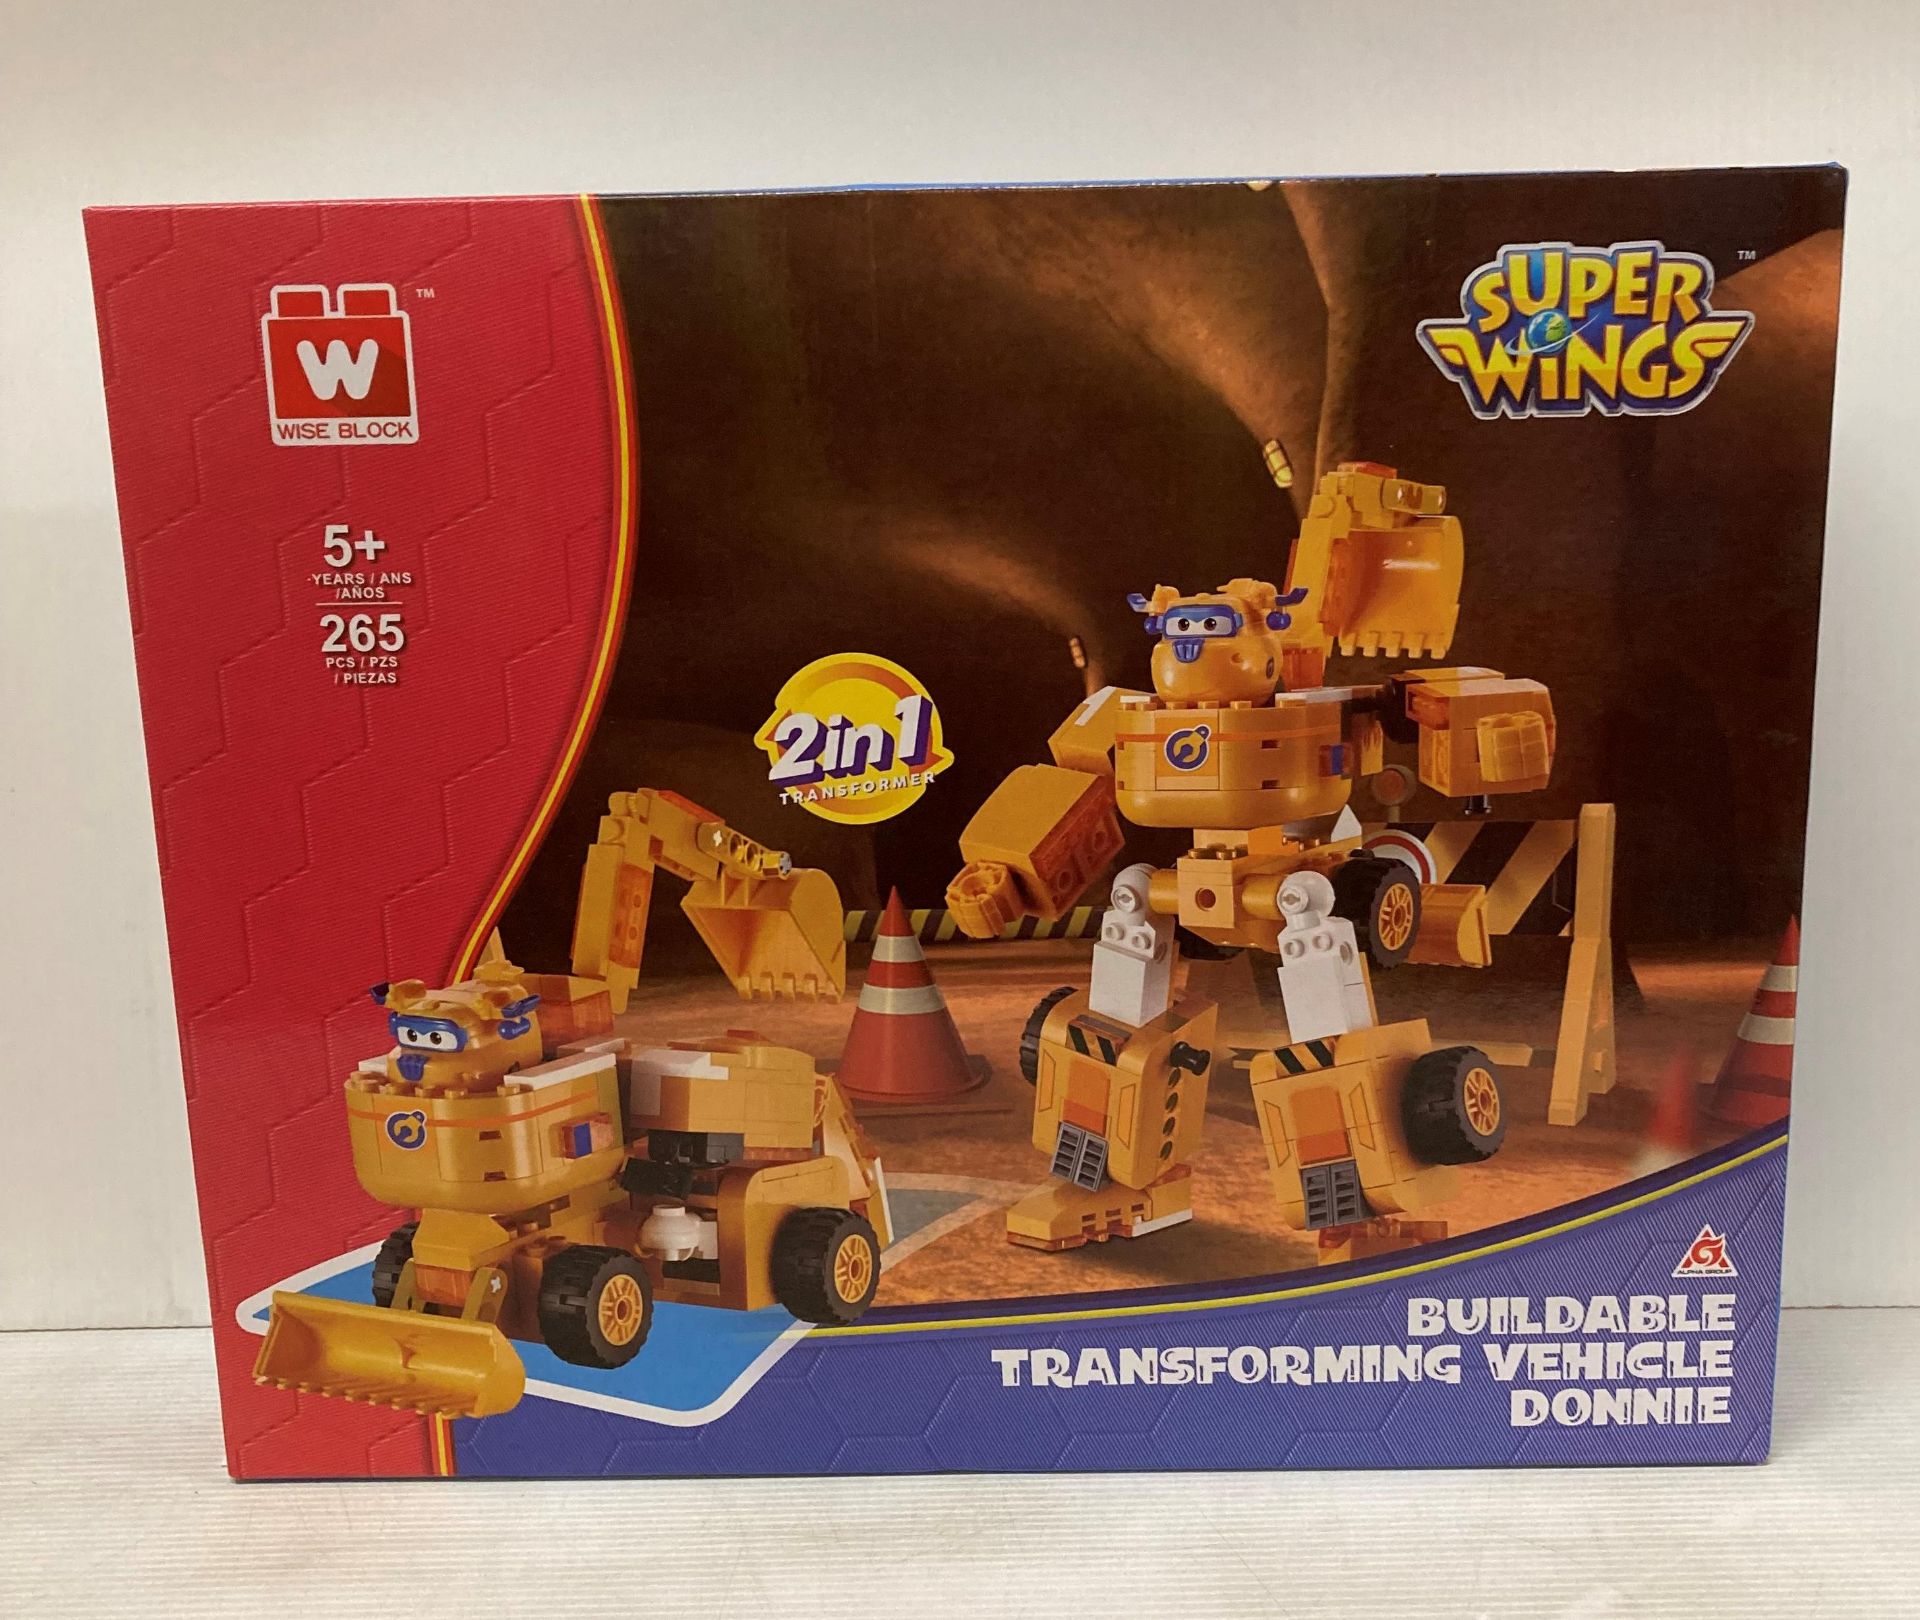 8 x Wise Block Super Wings Buildable Transforming Vehicles (Donnie) (saleroom location: L05)